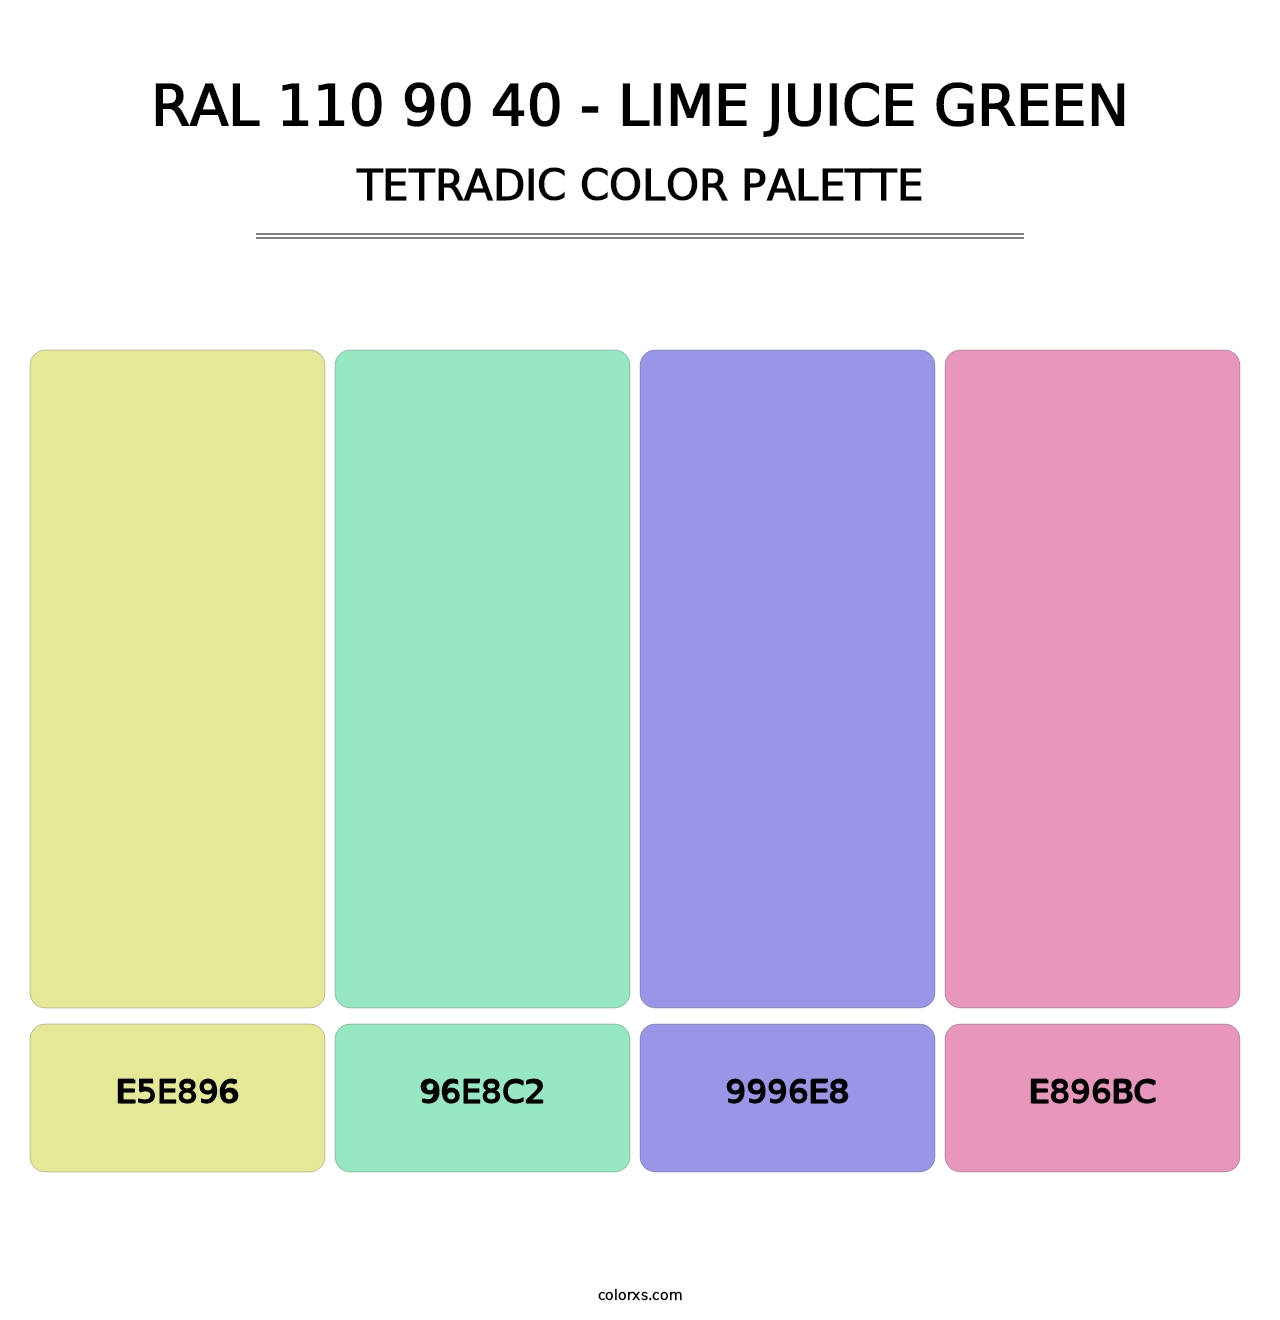 RAL 110 90 40 - Lime Juice Green - Tetradic Color Palette